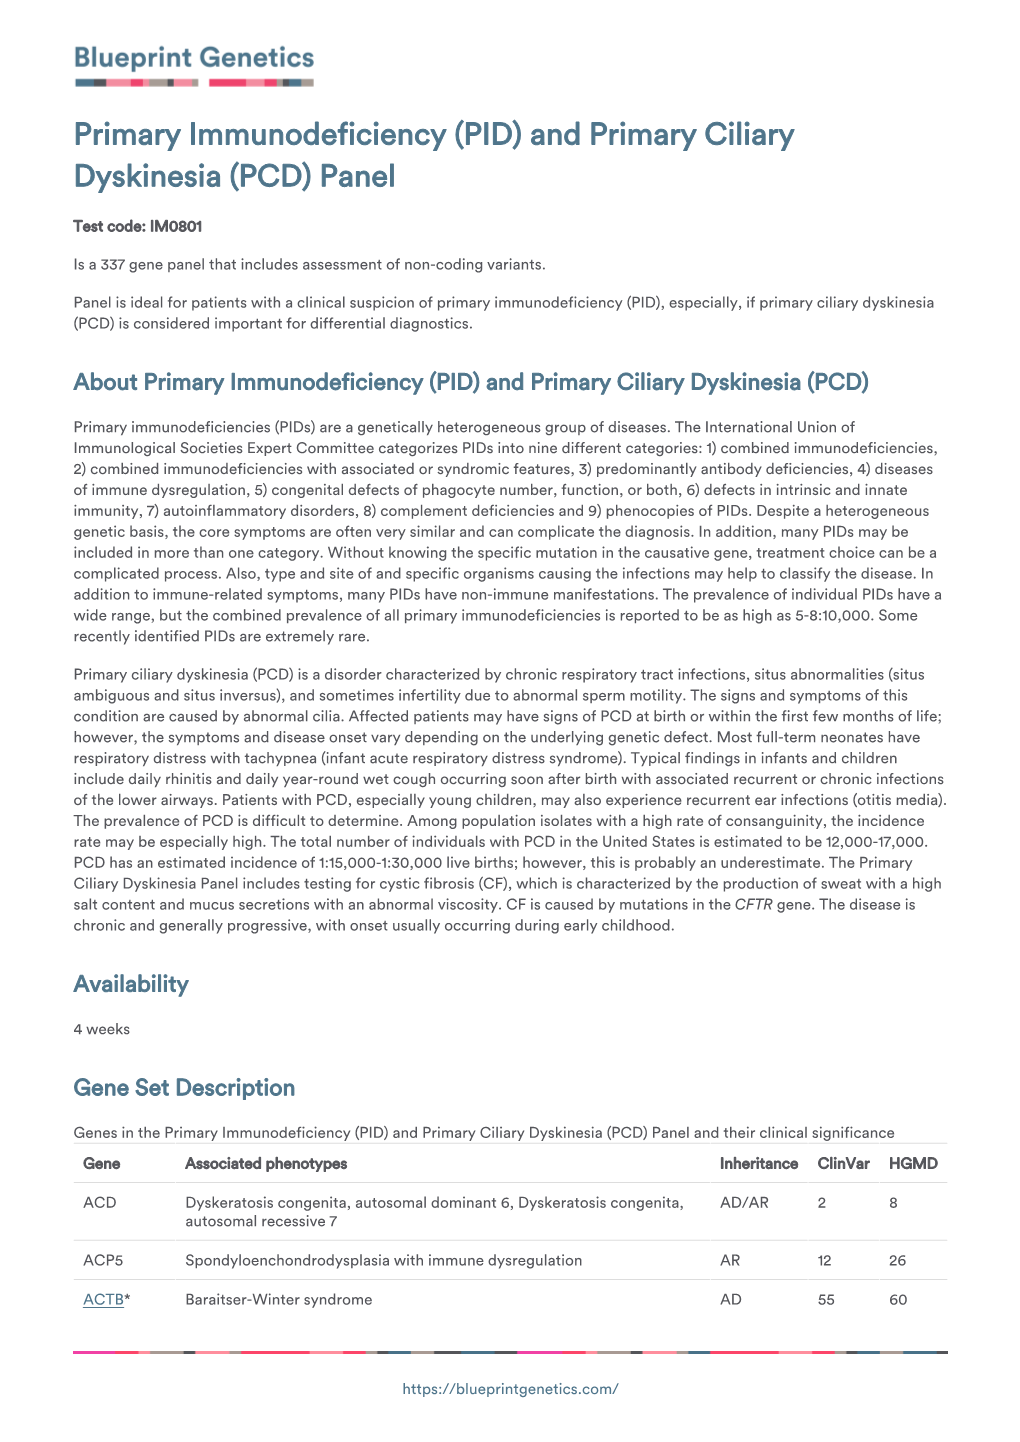 Blueprint Genetics Primary Immunodeficiency (PID) and Primary Ciliary Dyskinesia (PCD) Panel